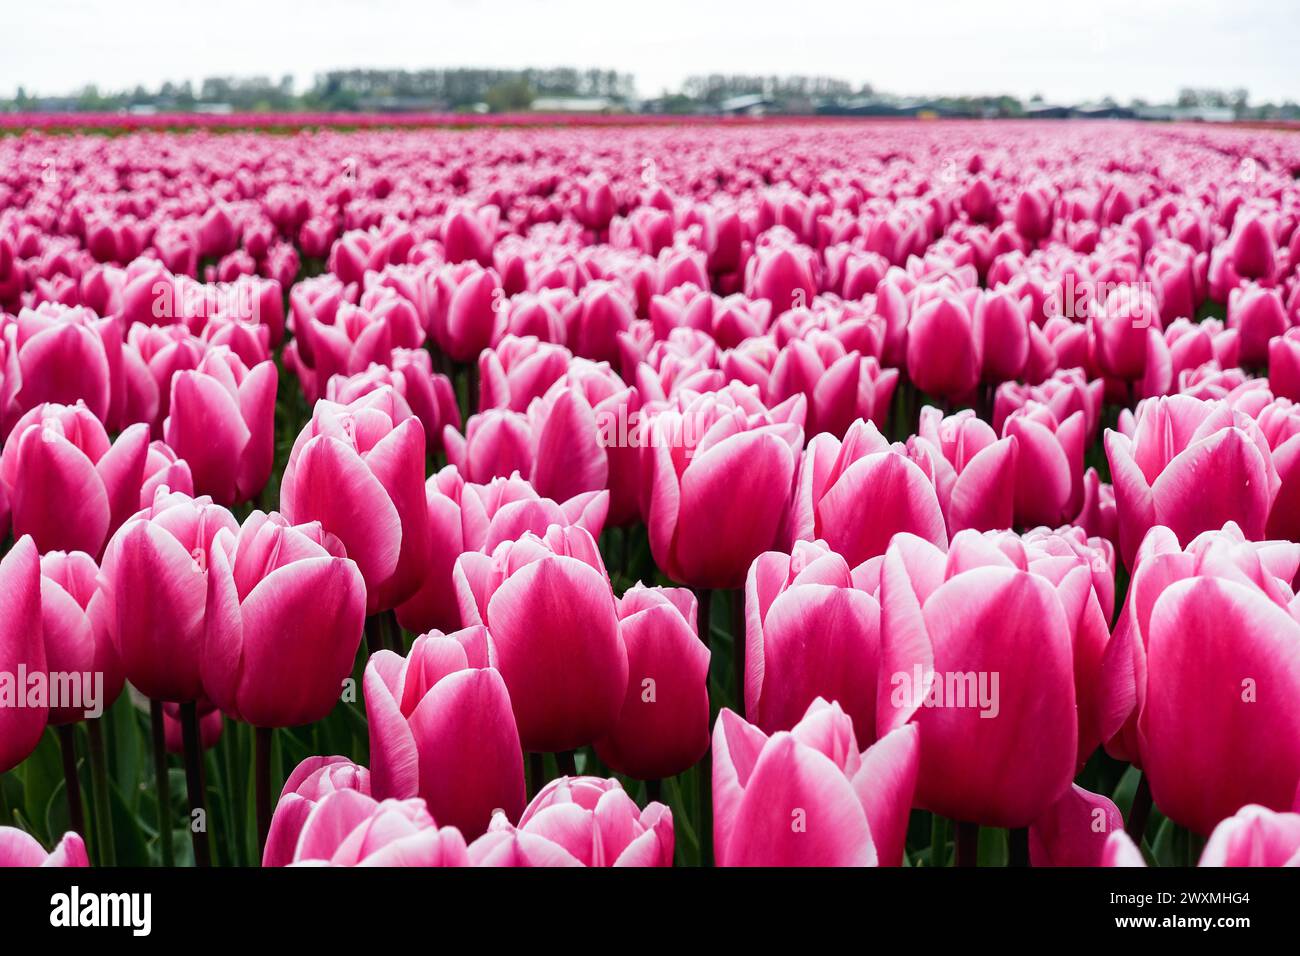 Vibrant purple tulips blooming in a dense floral field in the farming fields of the flower bulb region around Lisse, Netherlands Stock Photo